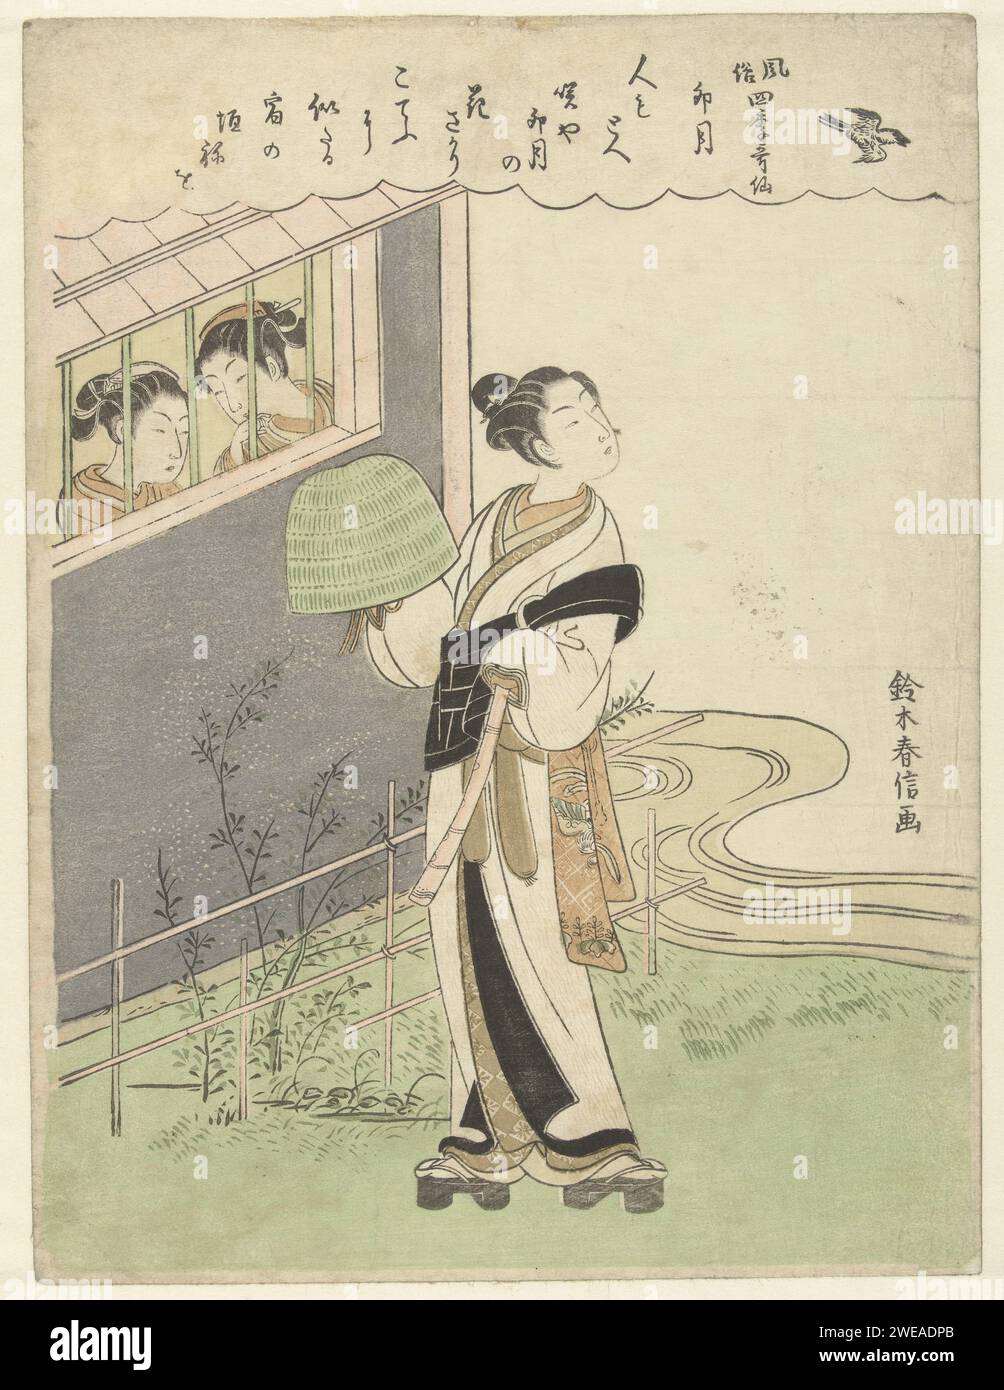 The fourth month, Suzuki Harunobu, 1765 - 1770 print Man (Komuso) with hat in the right and whistle in the left hand, standing by bamboo fence and river, looking up to Koekoek, while two girls watch him from behind a window. A poem in a cloud -shaped cartouche along the top of the print. Japan paper color woodcut adult man. head-gear. flute, aulos, tibia Stock Photo